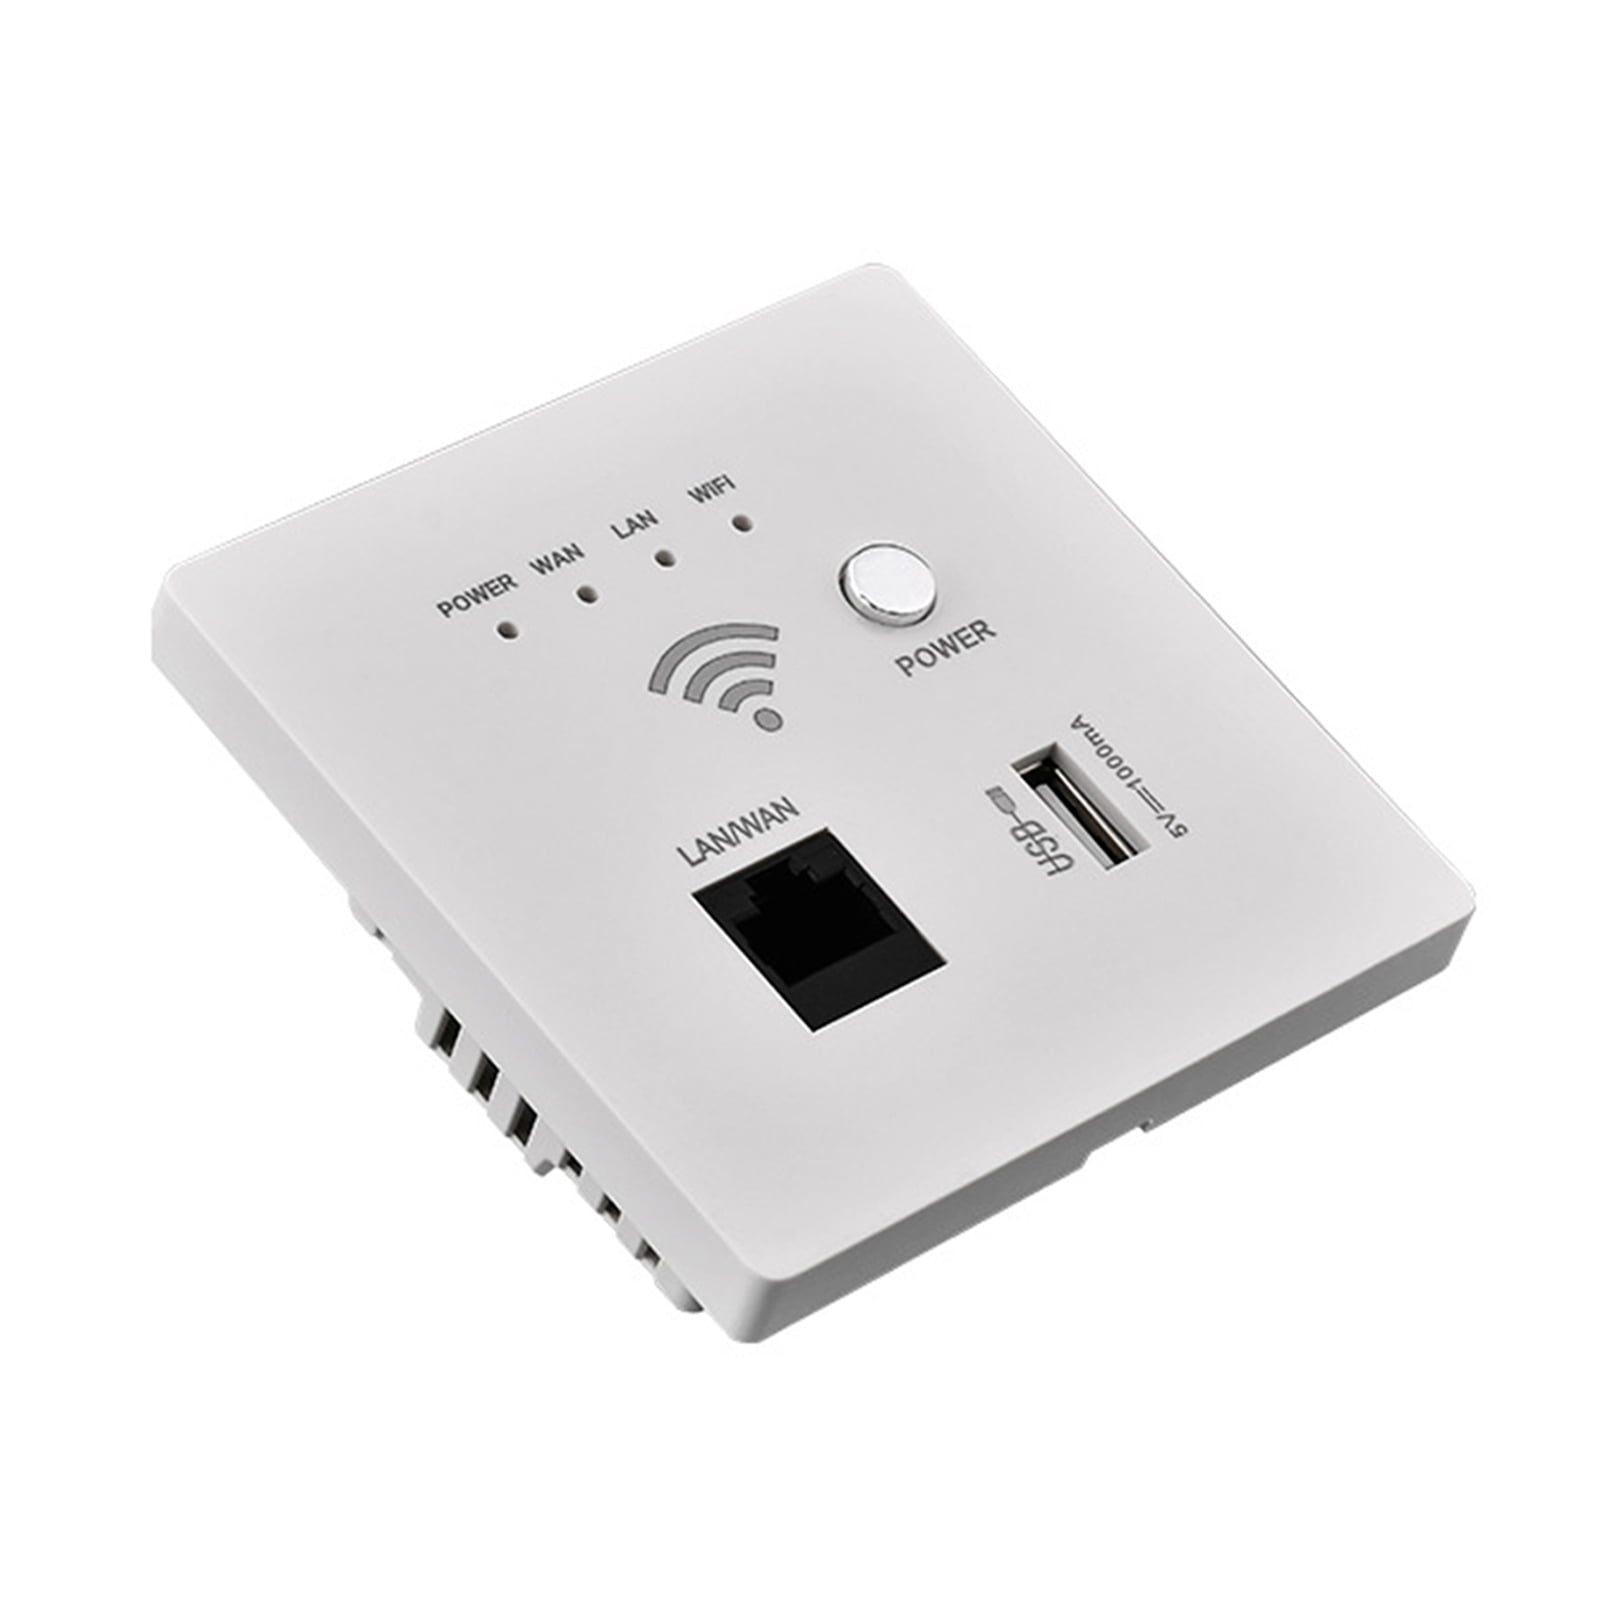 Frogued 300Mbps In-Wall AP Repeater WiFi Router Wireless RJ45 PoE USB  Charging Socket (White)